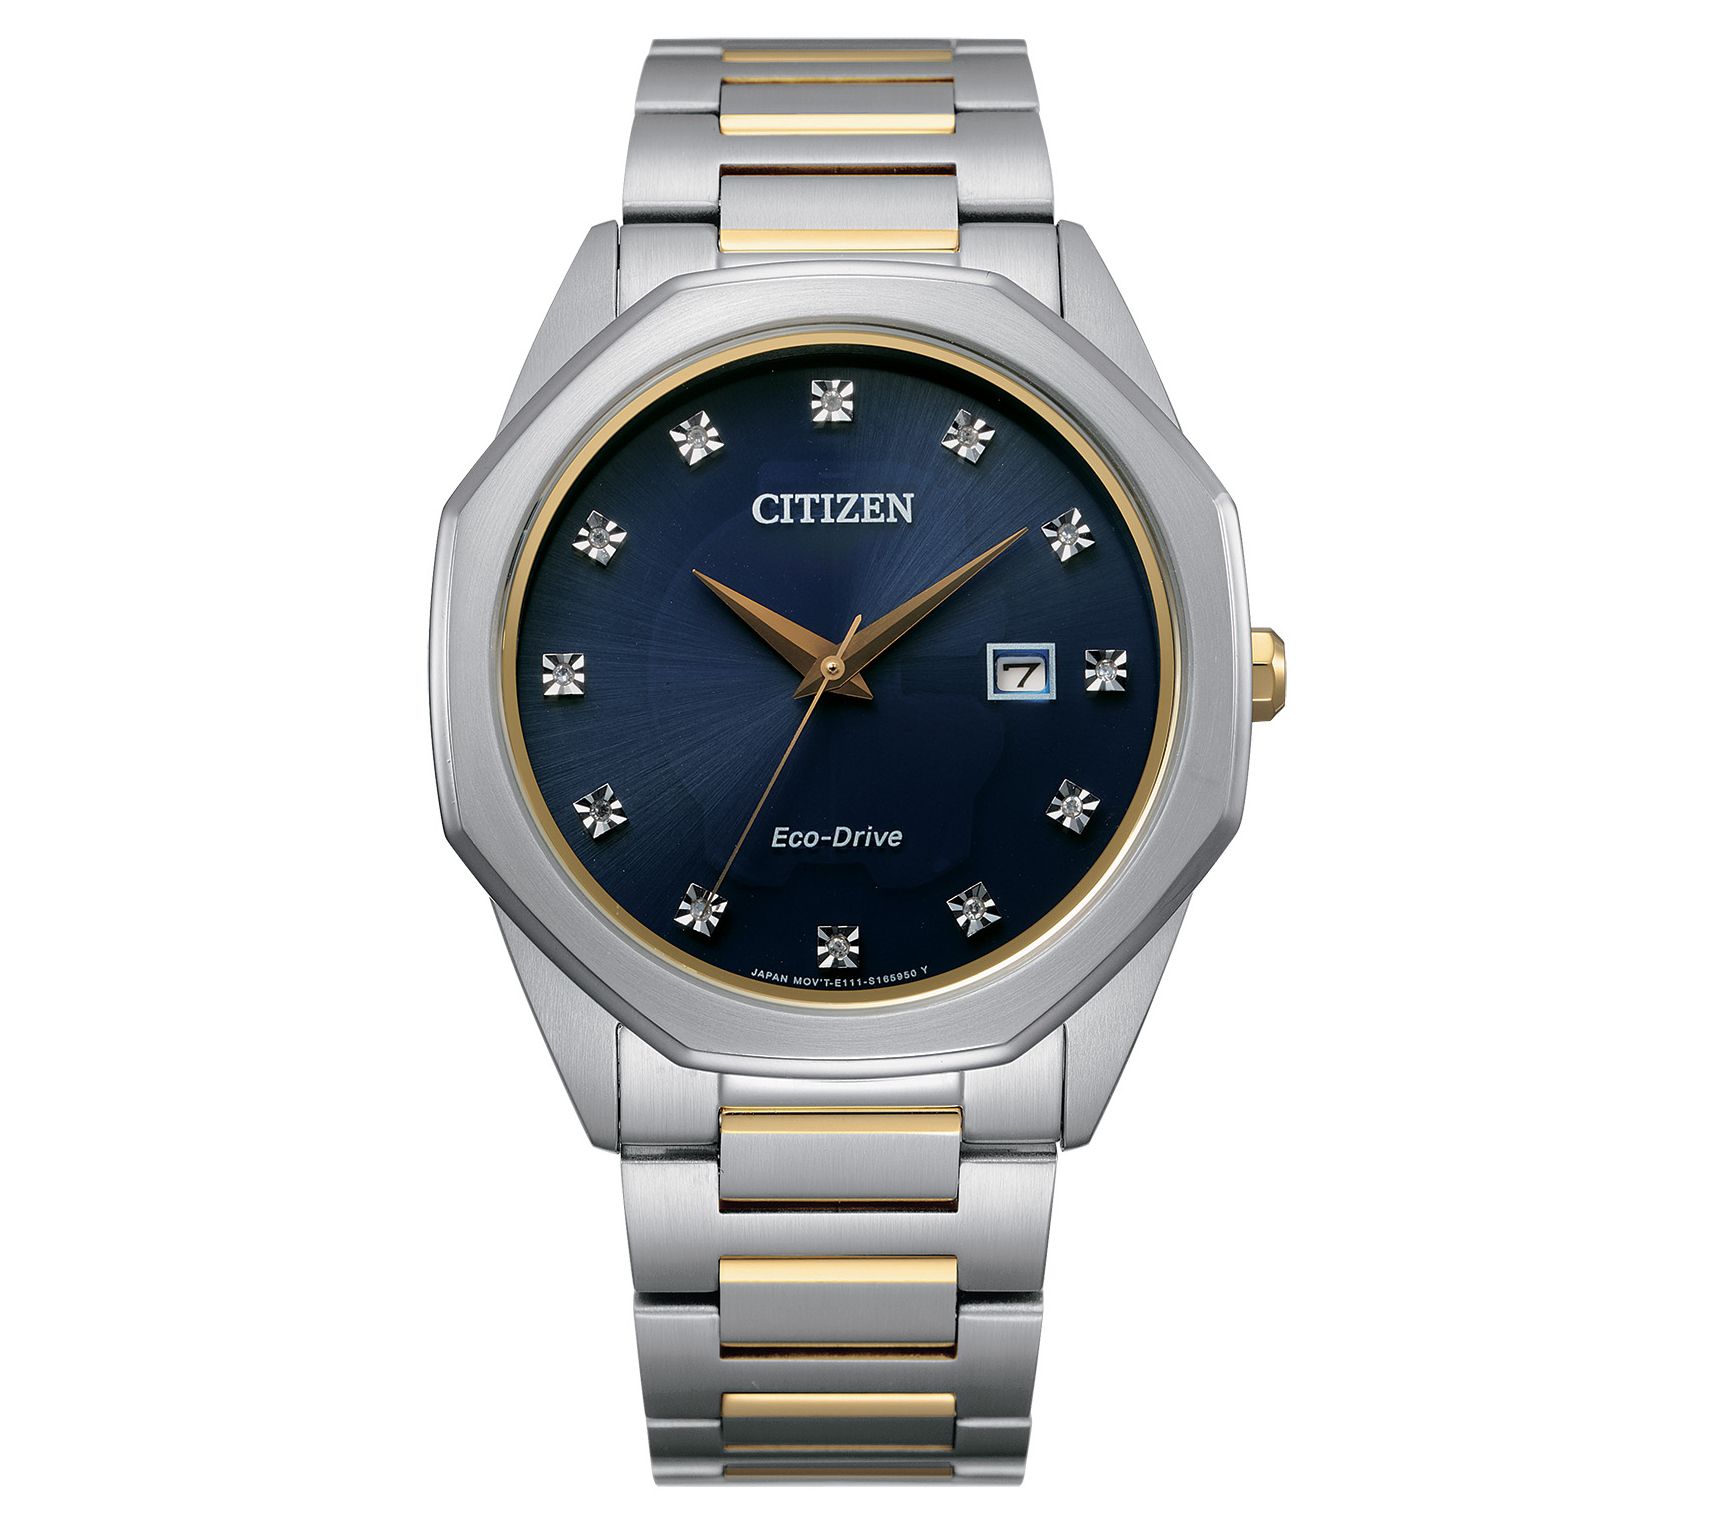 Citizen Eco-Drive Men's Two-Tone Stainless Stee l Watch - QVC.com